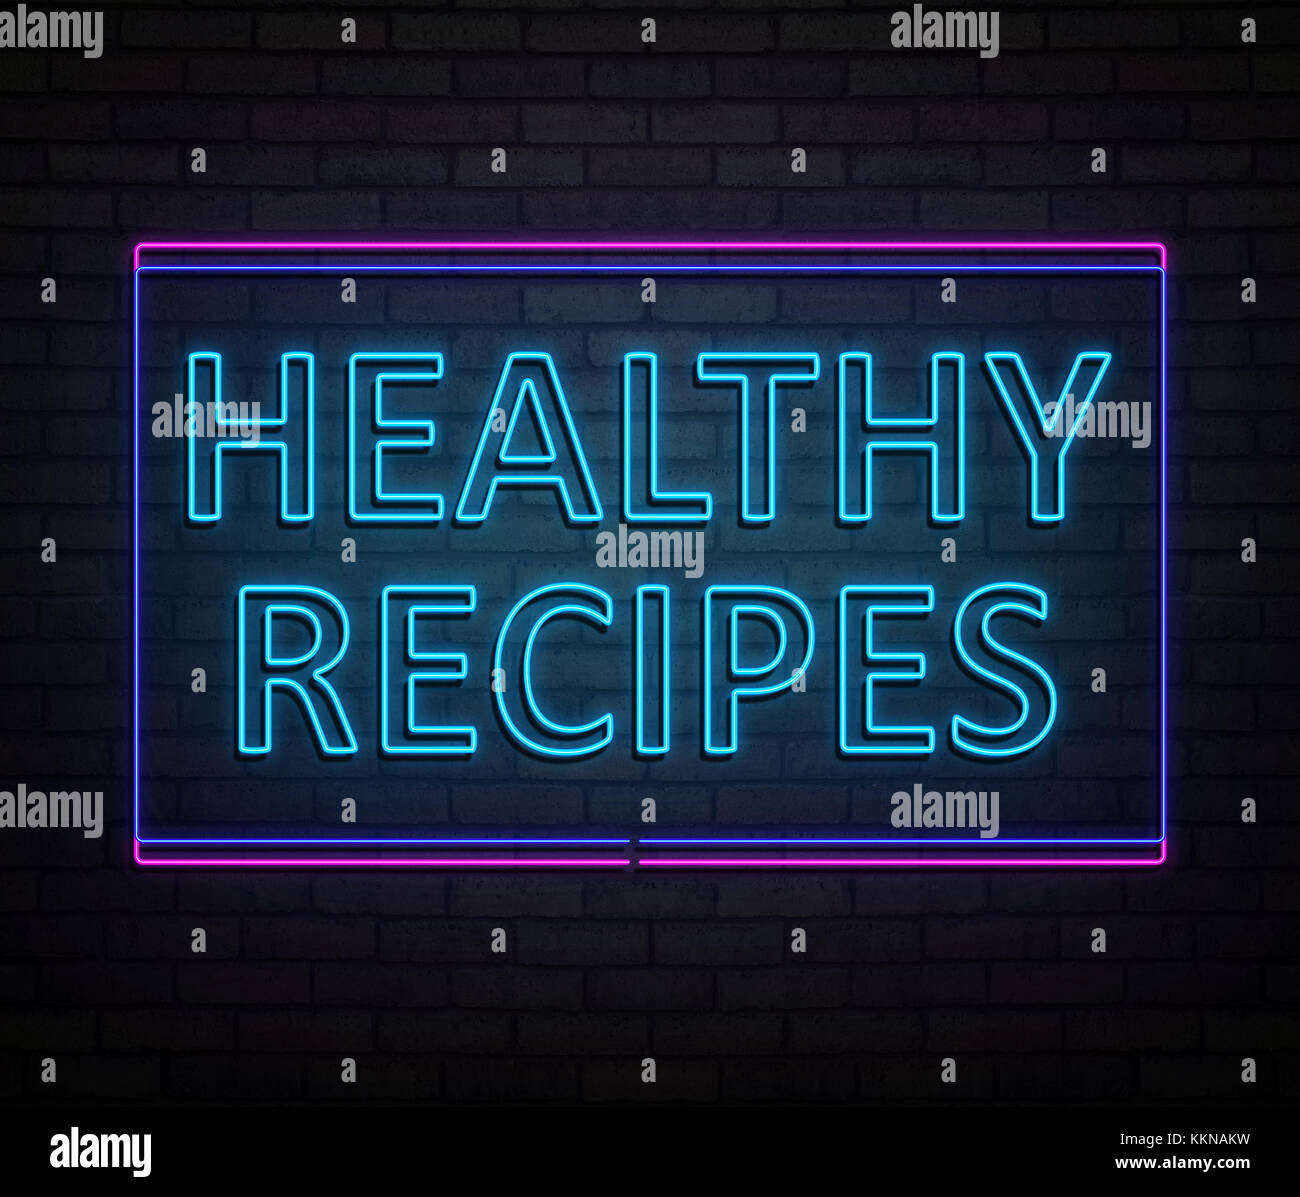 3d Illustration depicting an illuminated neon sign with a healthy recipes concept. Stock Photo